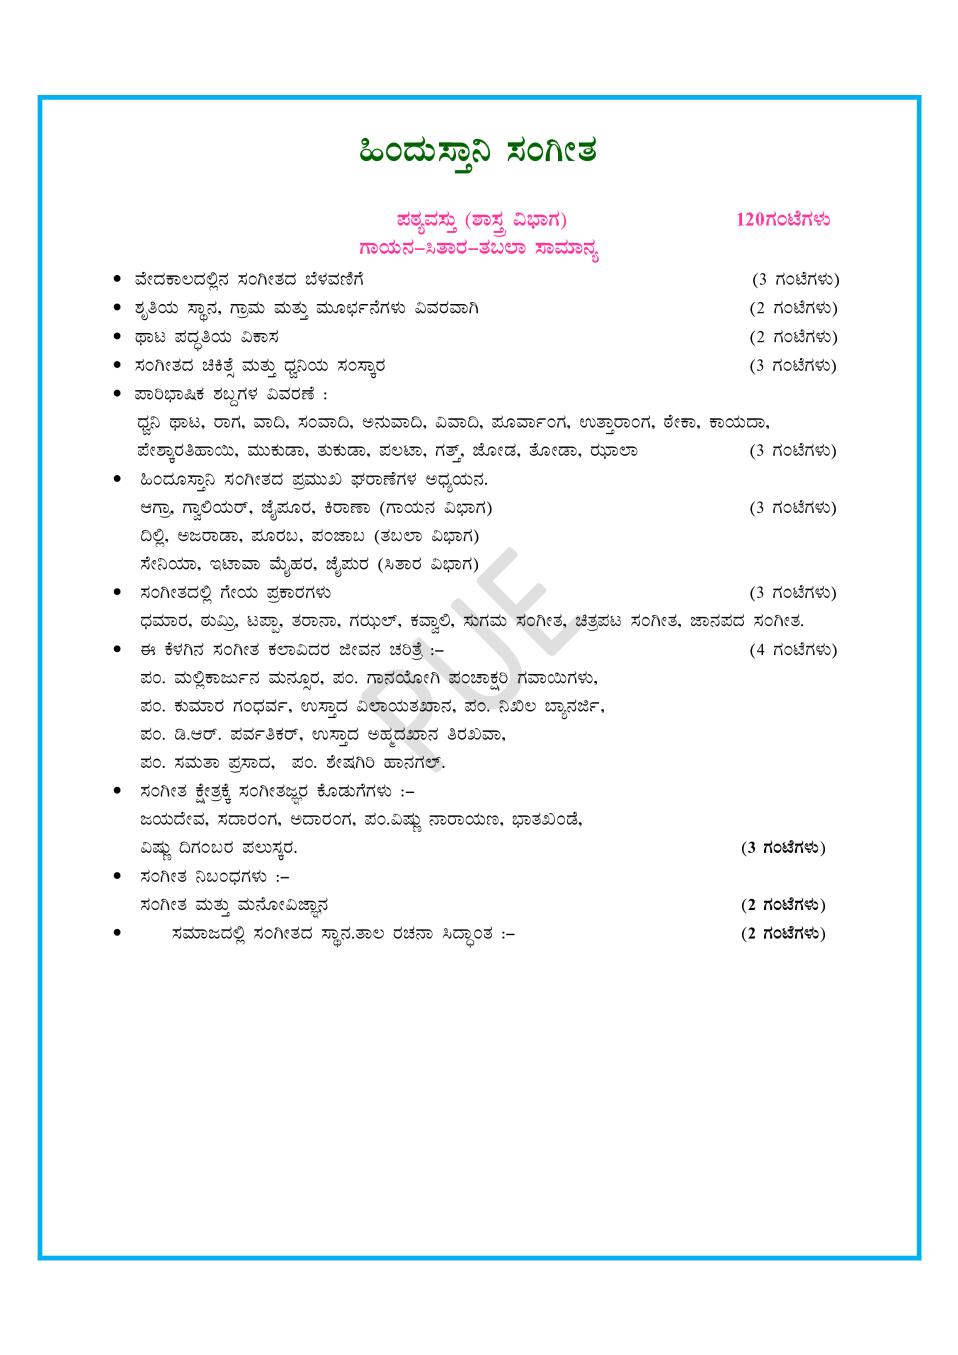 2nd PUC Syllabus for Hindustani Music - Page 1